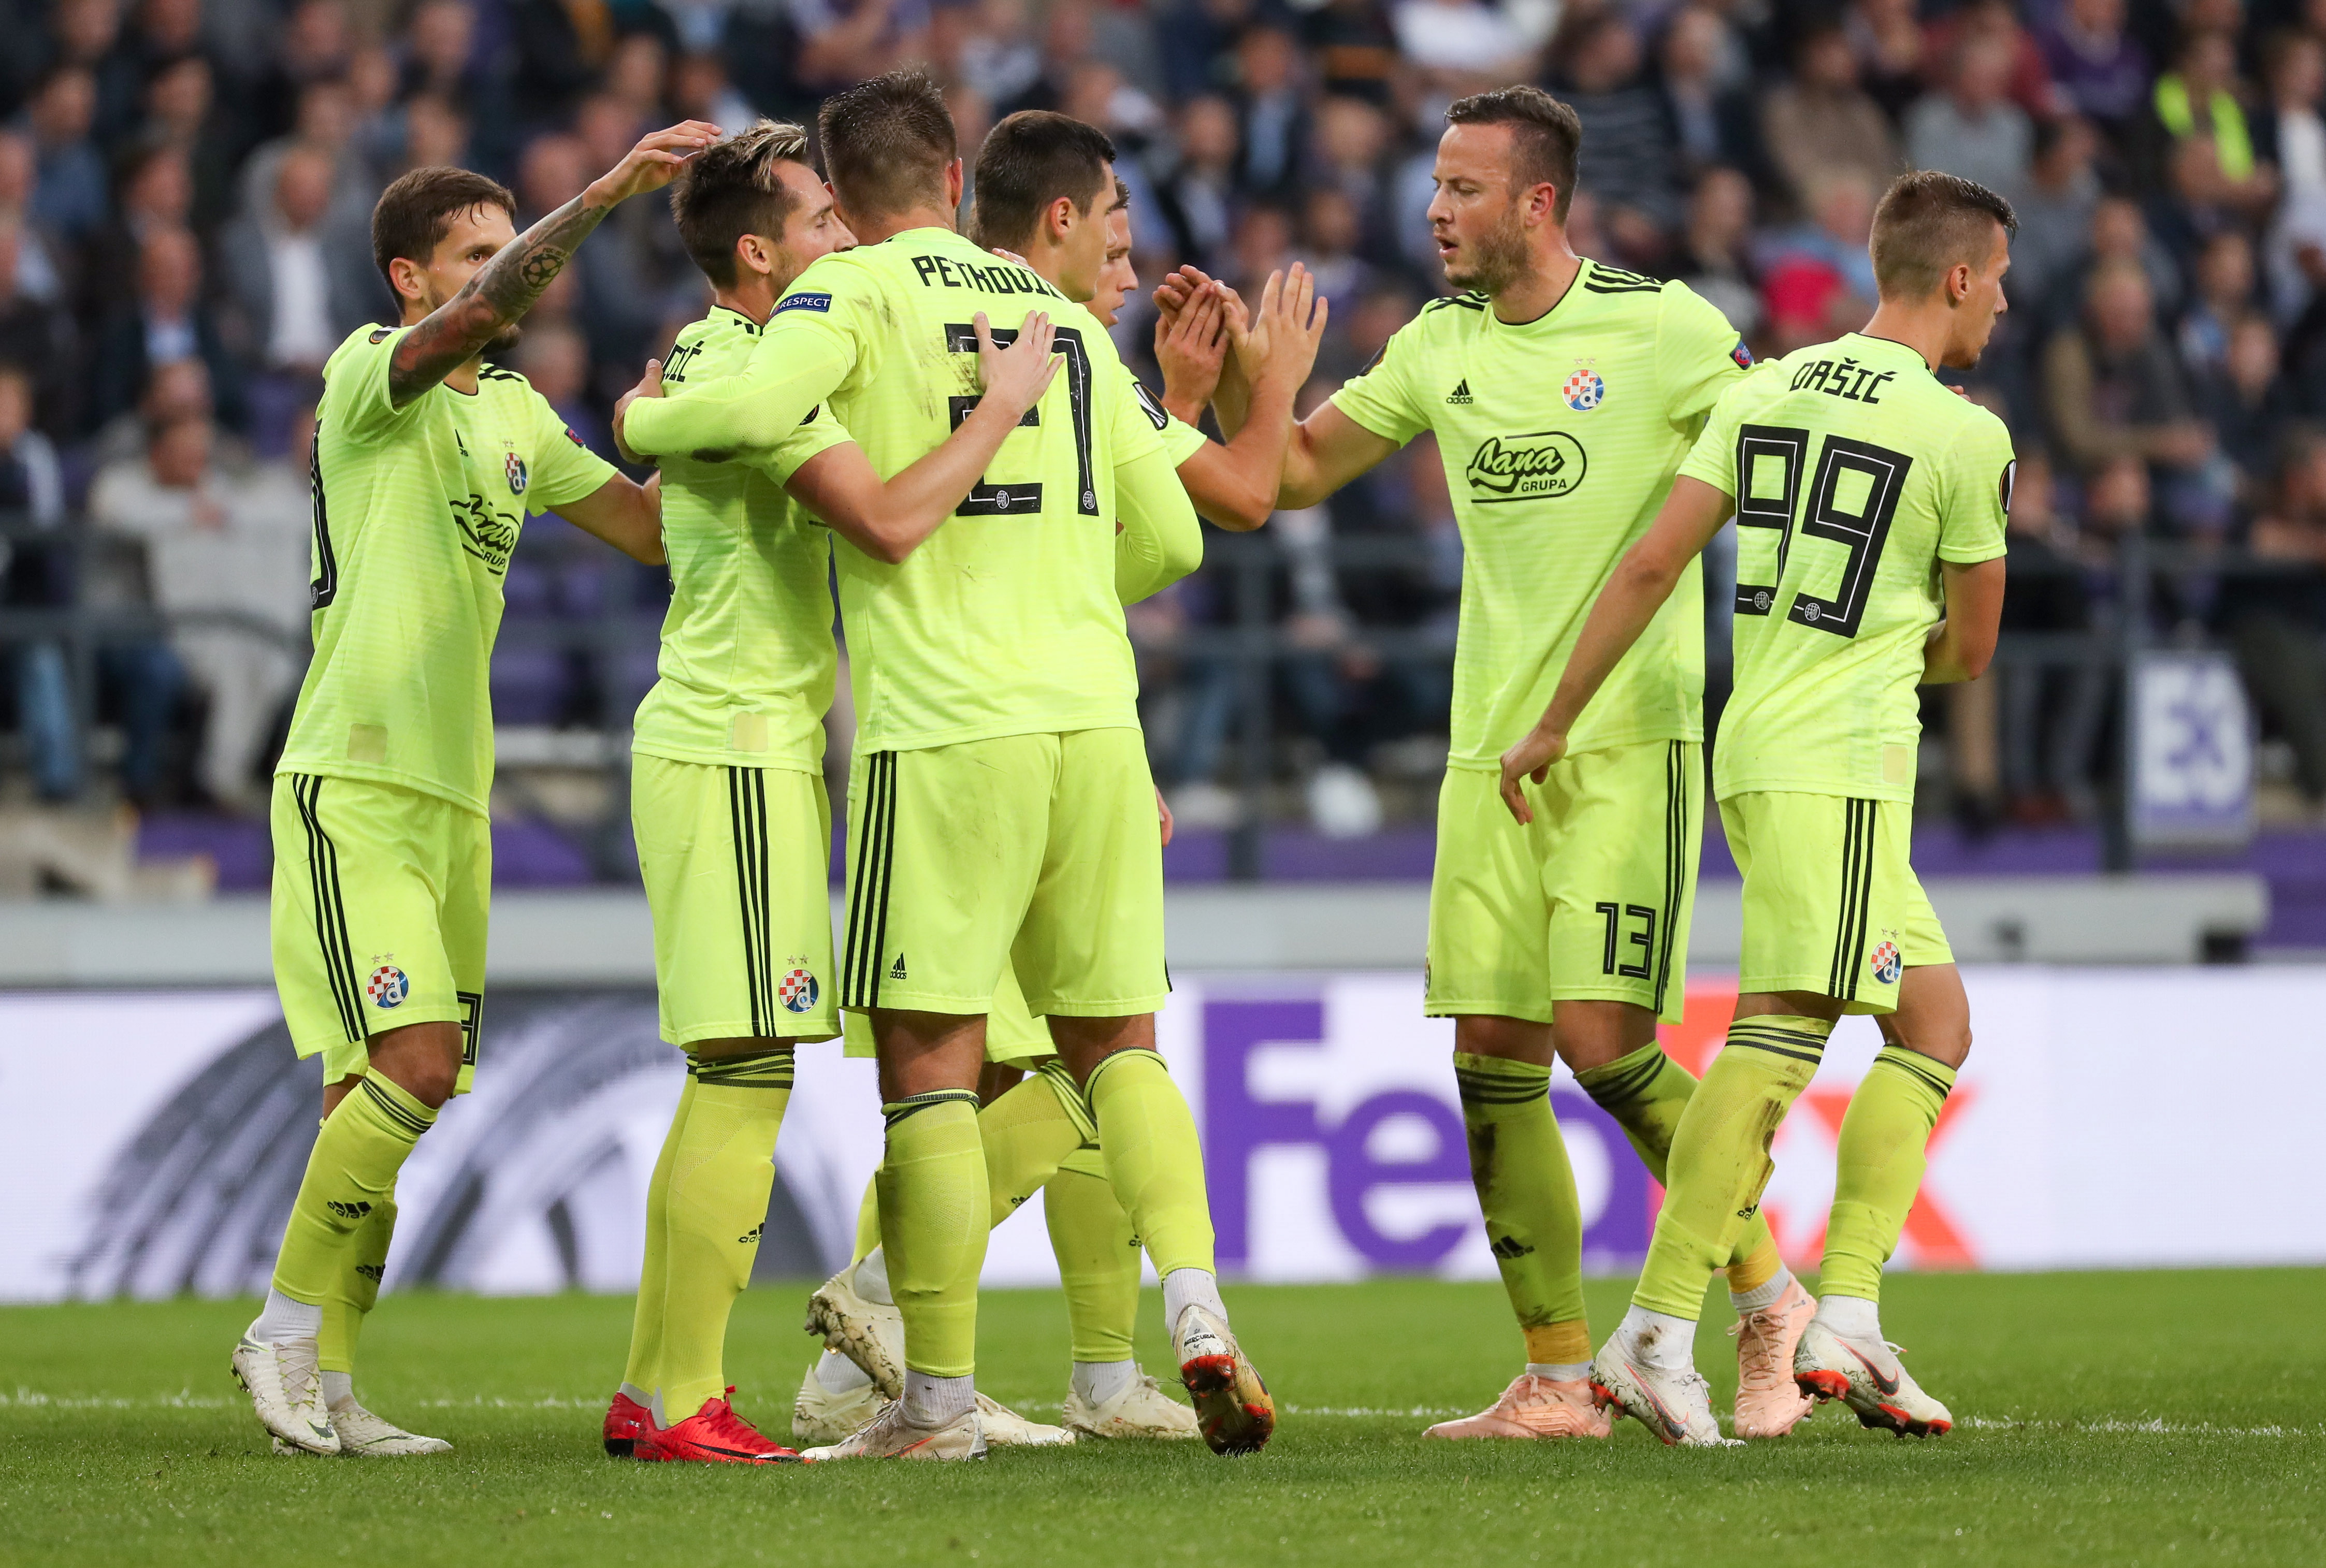 epa07069495 Dinamo Zagreb players celebrate the 0-1 goal during the UEFA Europa League soccer match between RSC Anderlecht and Dinamo Zagreb  at the Constant Vanden Stock stadium in Anderlecht, Belgium, 04 October 2018.  EPA/STEPHANIE LECOCQ